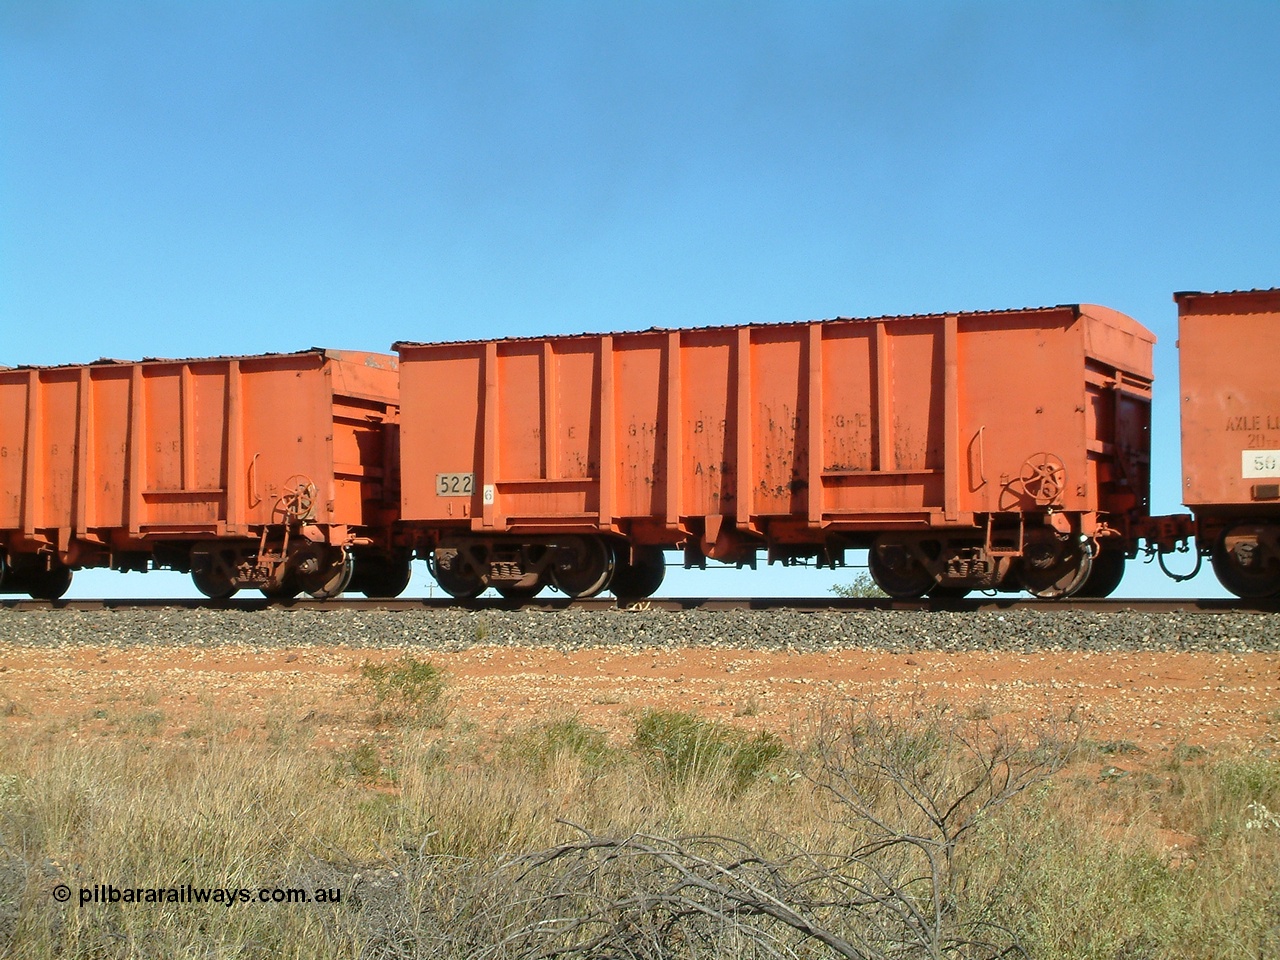 040806 092732
Goldsworthy Junction, weighbridge test waggon 522, originally built by Magor USA and ex Oroville Dam, converted by Mt Newman Mining into a 20 ton axle load test waggon.
